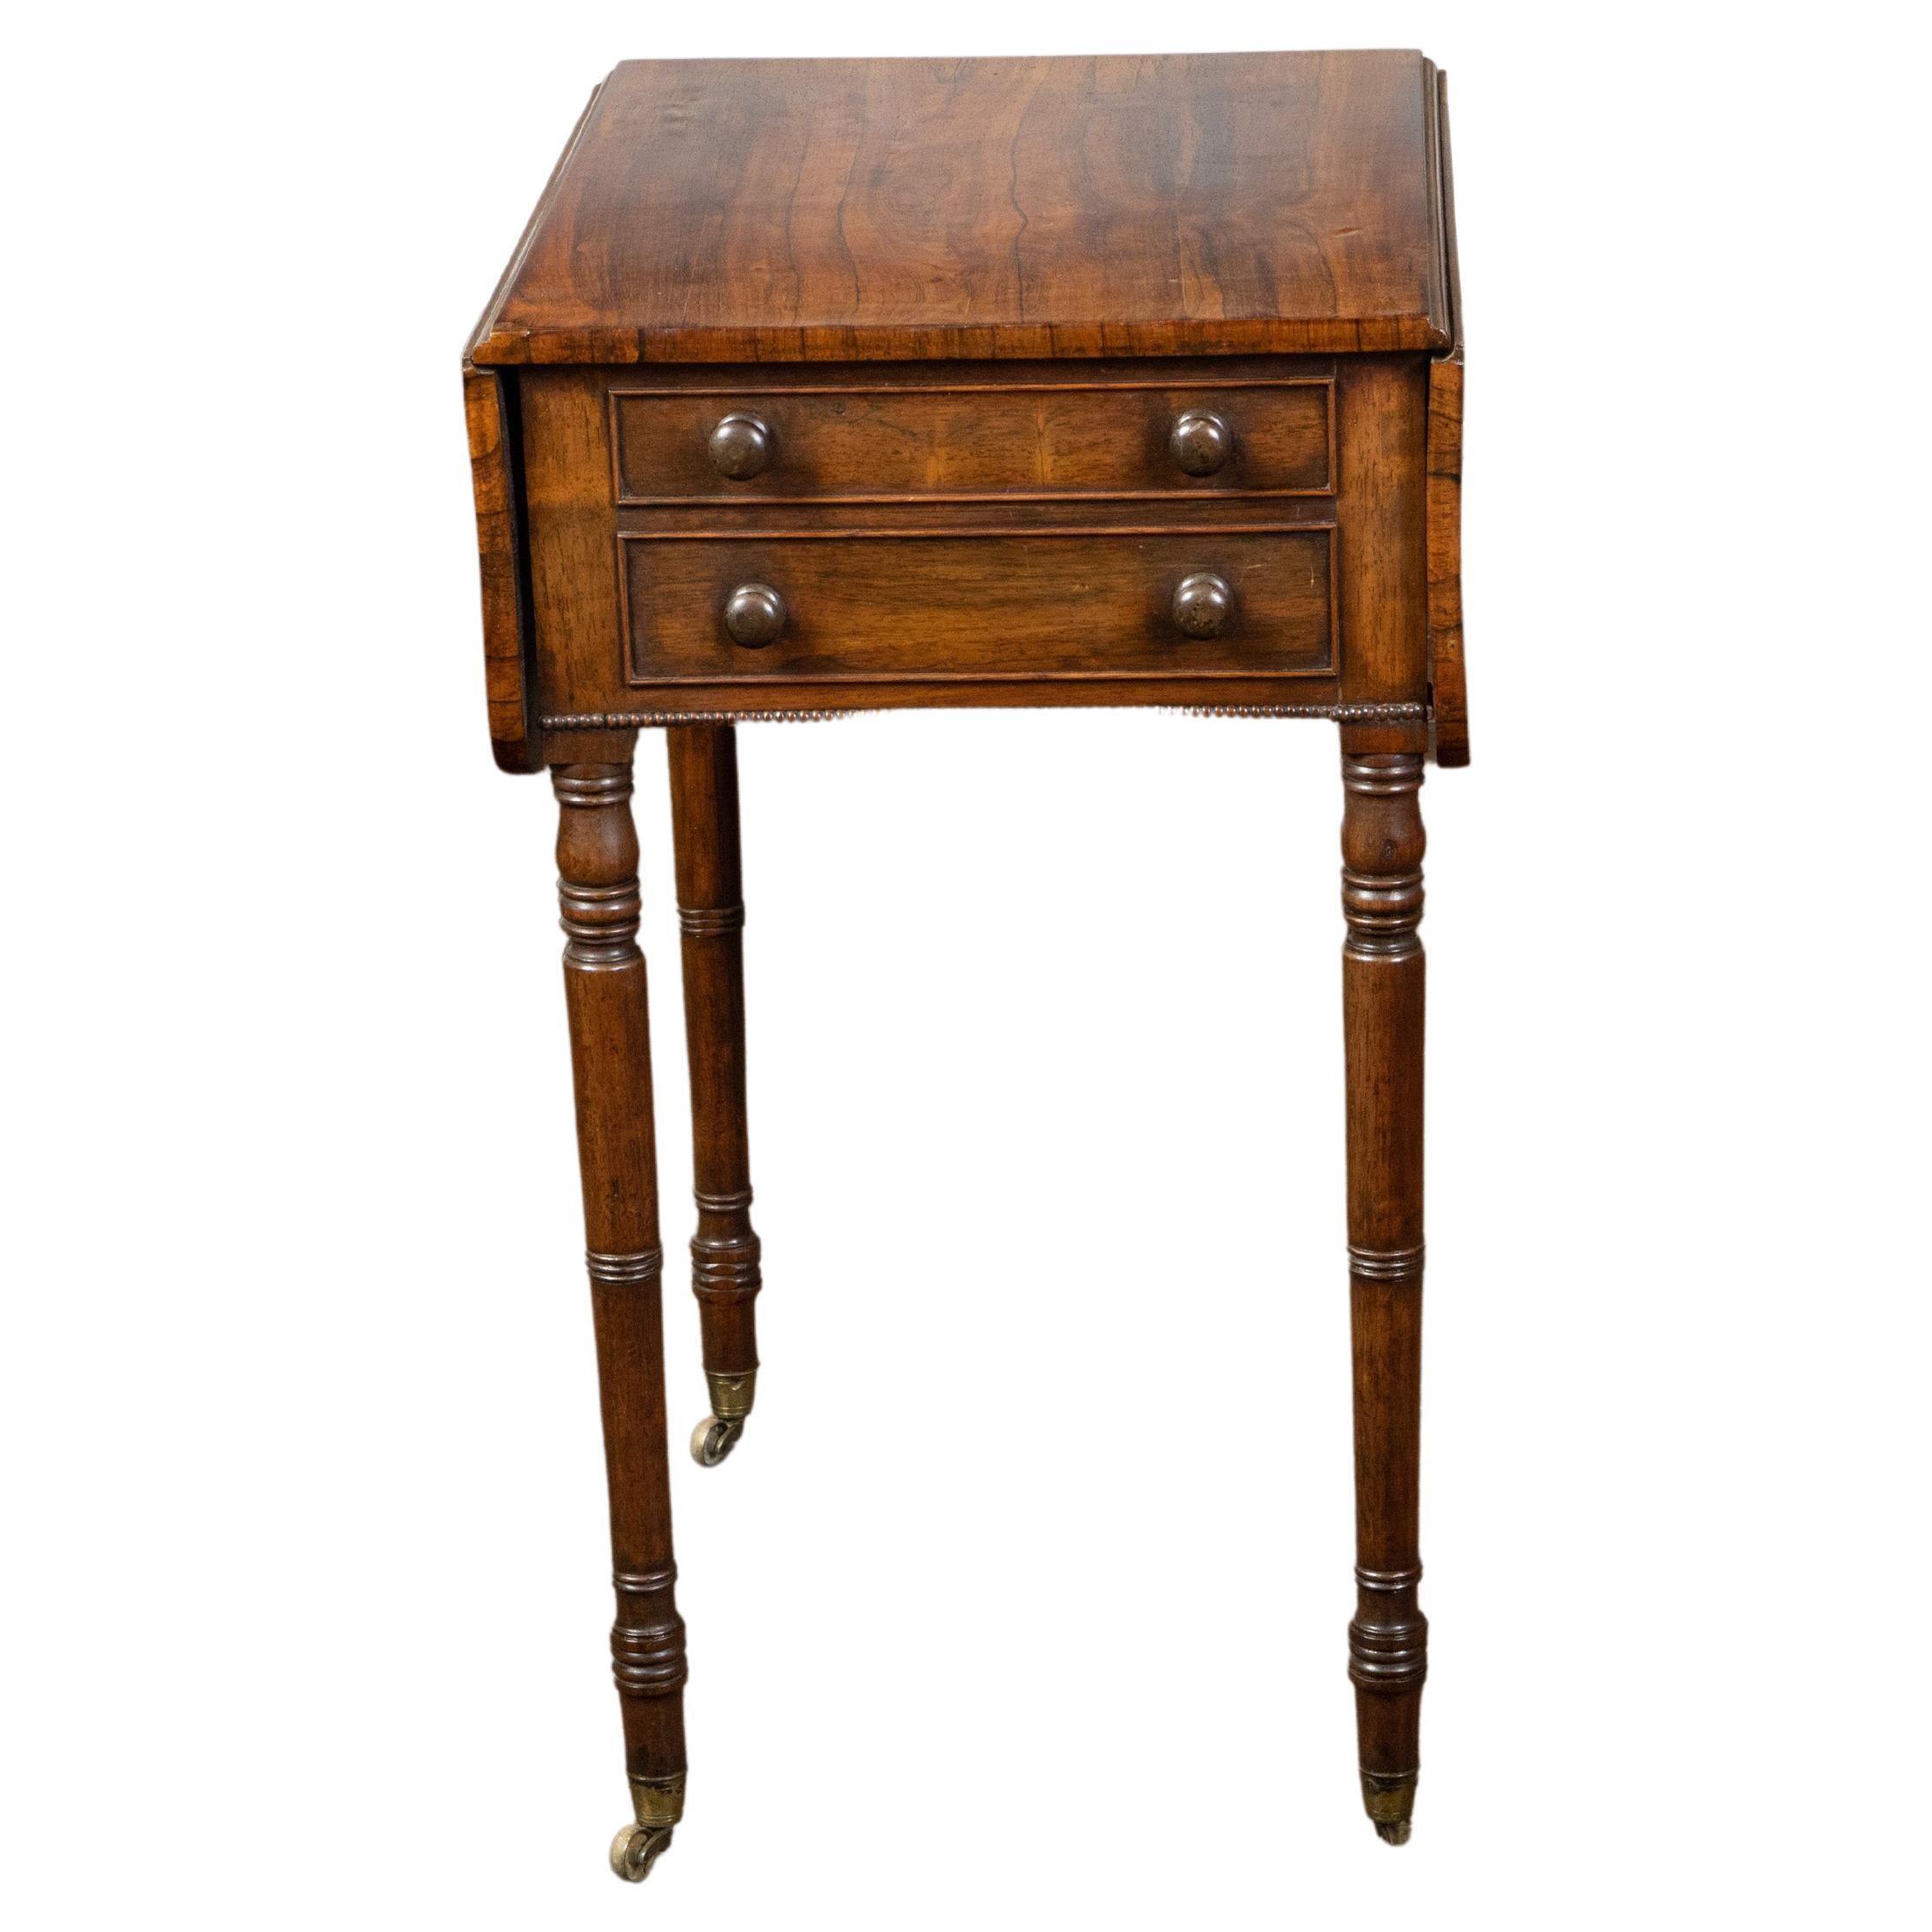 English Regency 1820s Mahogany Pembroke Table with Drop Leaves and Drawers